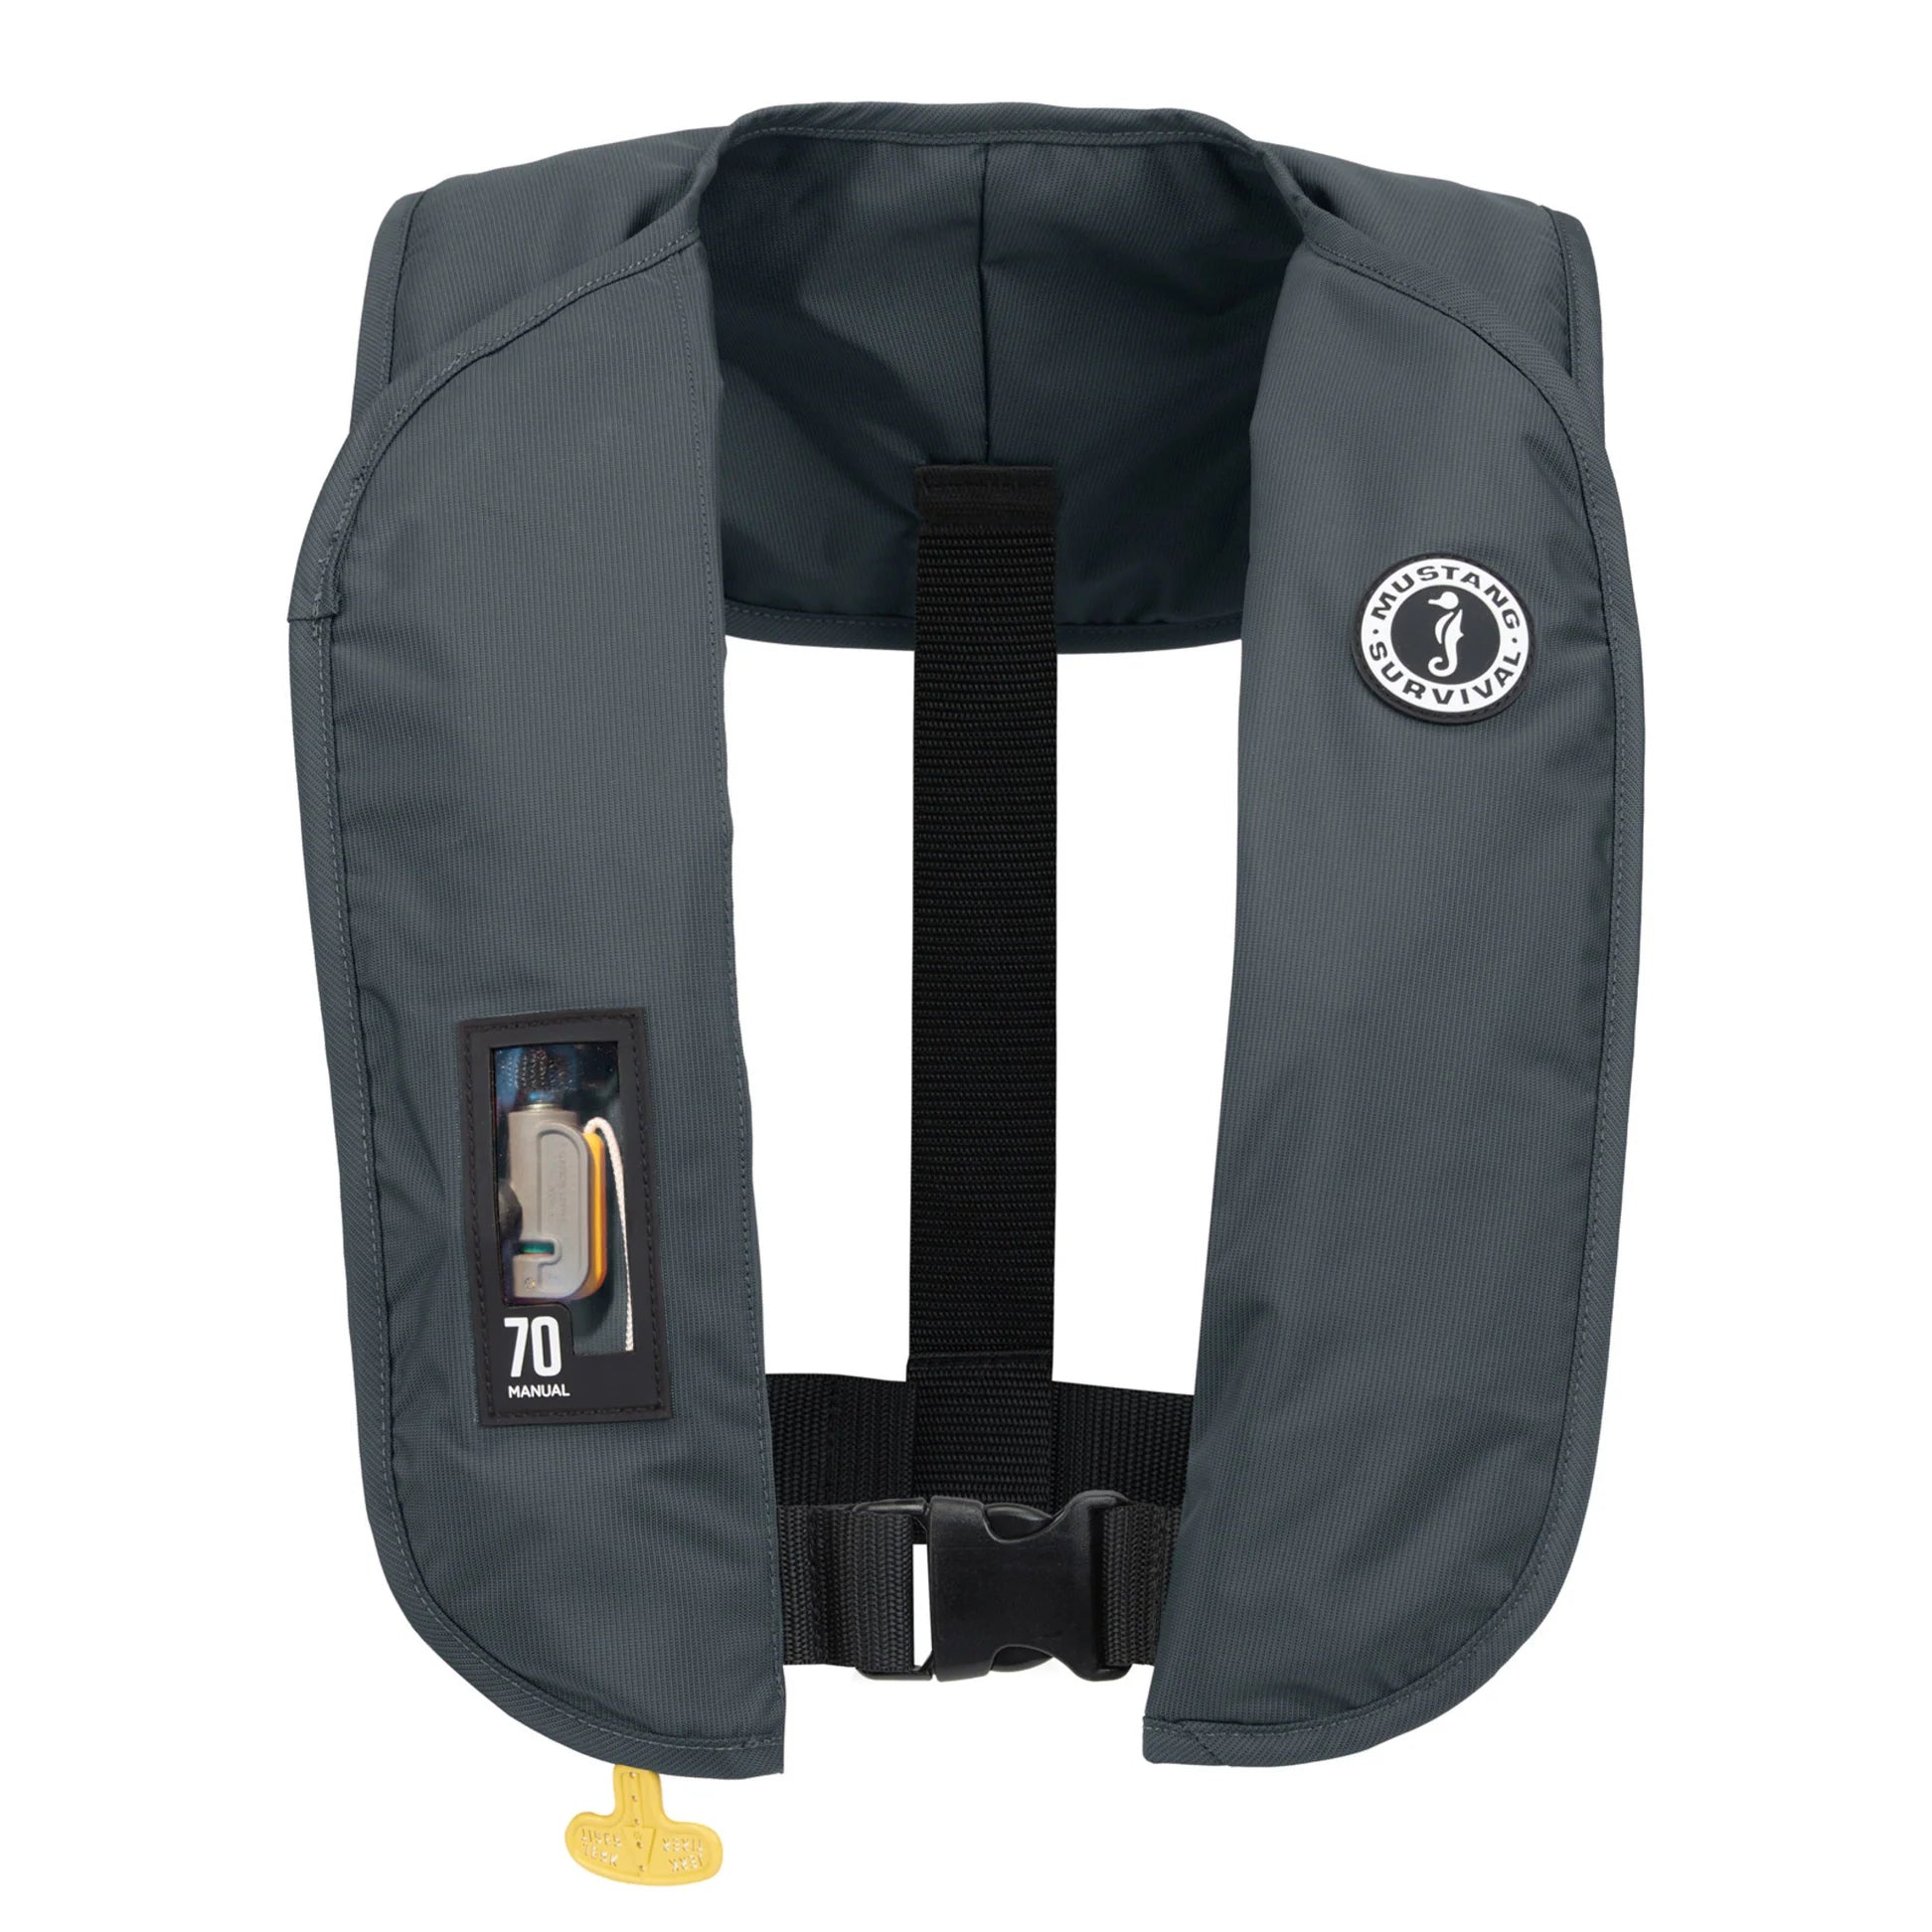 MIT 70 Manual Inflatable PFD